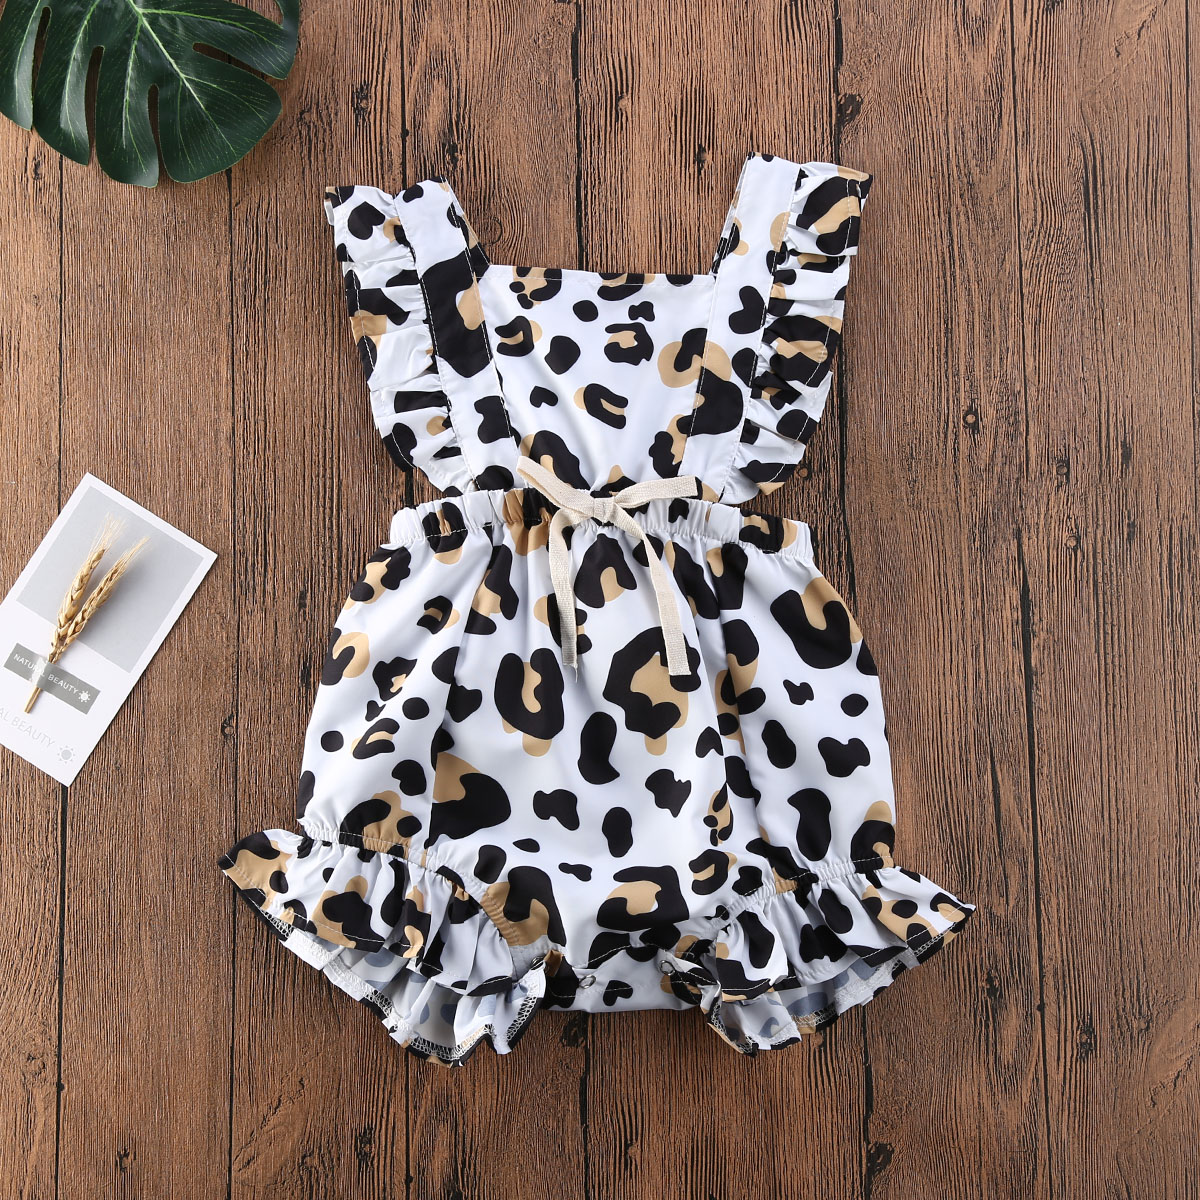 

Baby Girl Clothes Girls Leopard Print Sleeveless Ruffle Romper Newborn Jumpsuit One-Piece Sunsuit Baby Summer Clothing, Default color